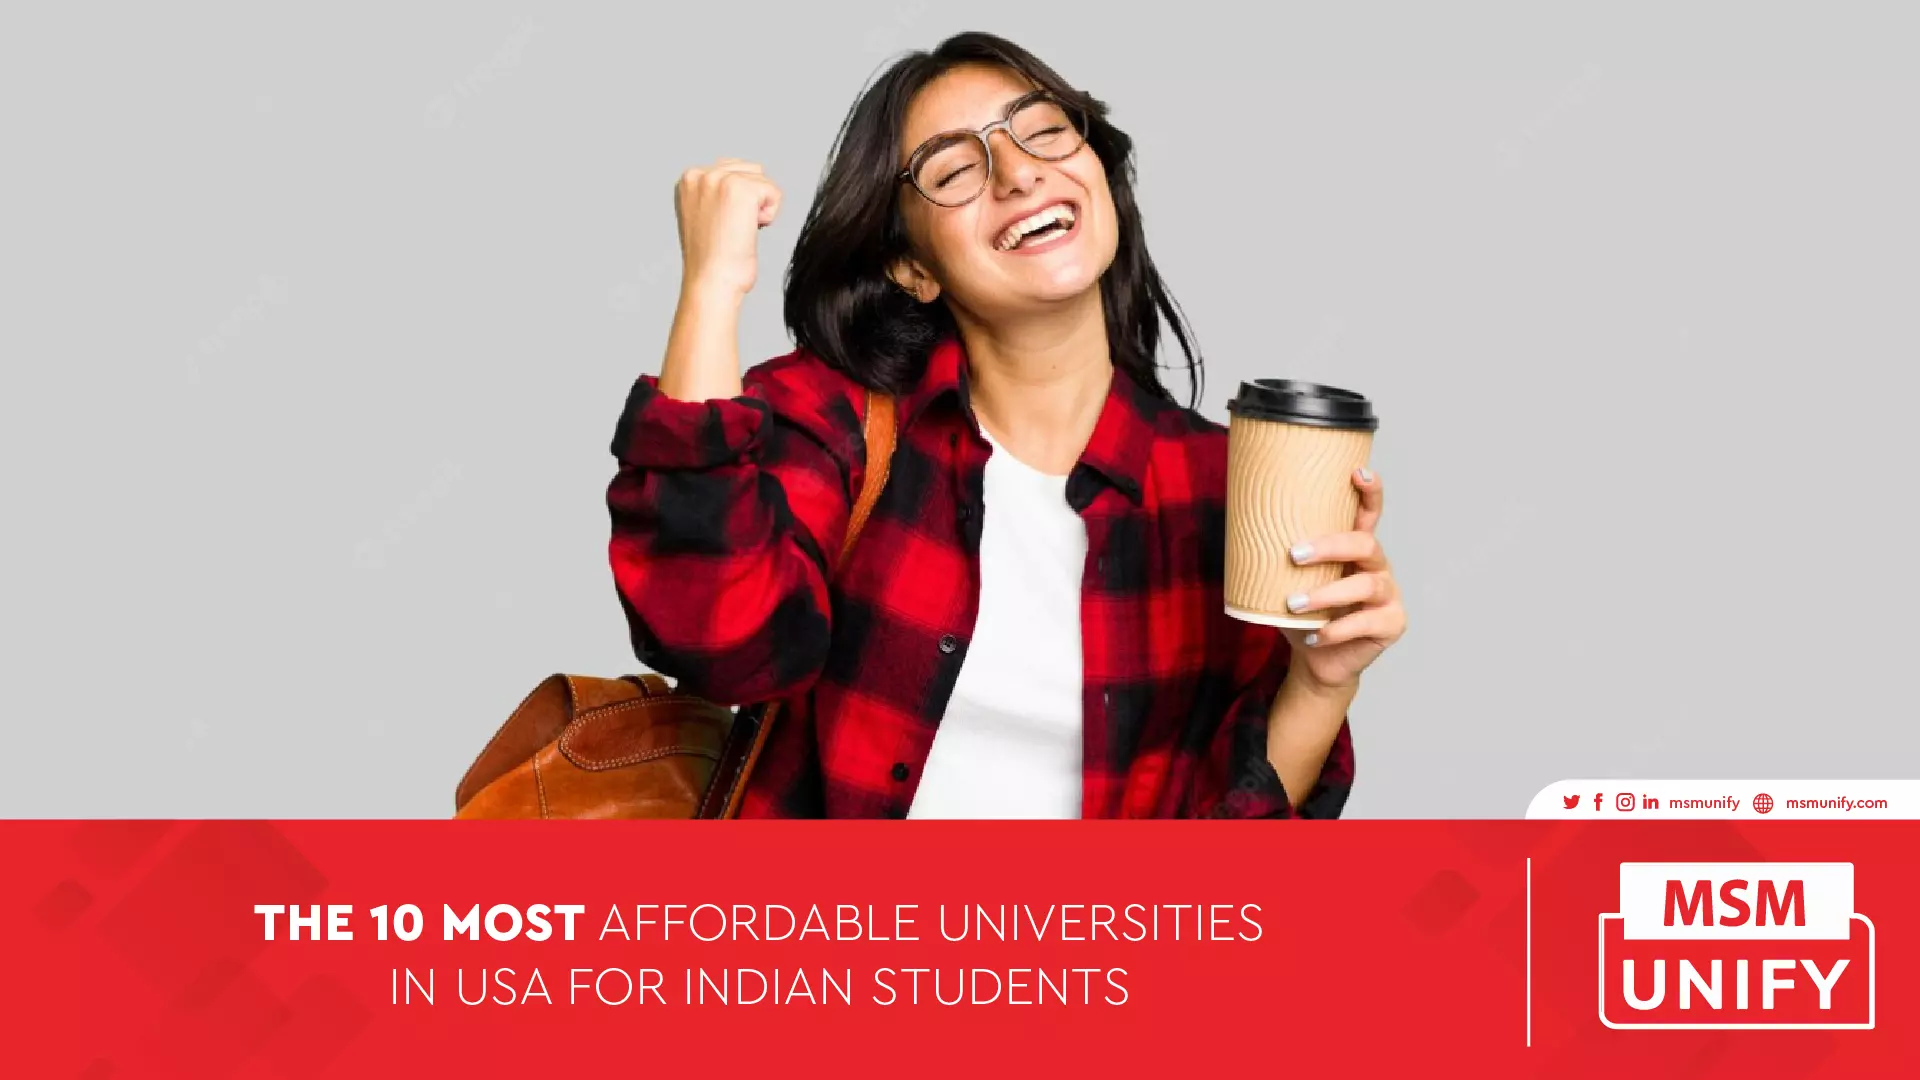 MSM Unify 10 Most Affordable Universities in USA